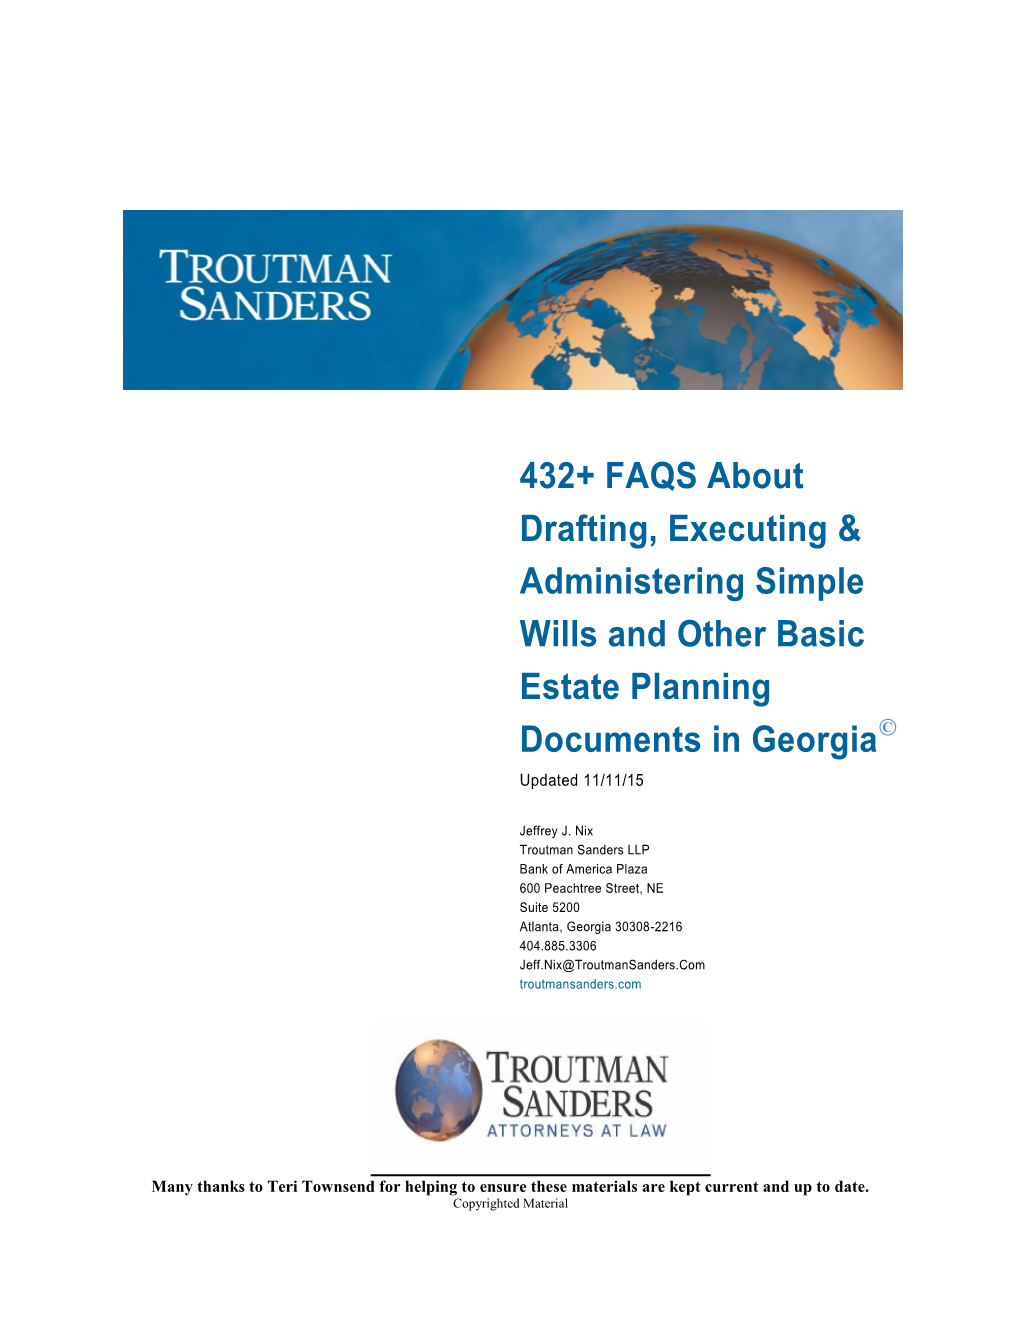 432+ FAQS About Drafting, Executing & Administering Simple Wills And